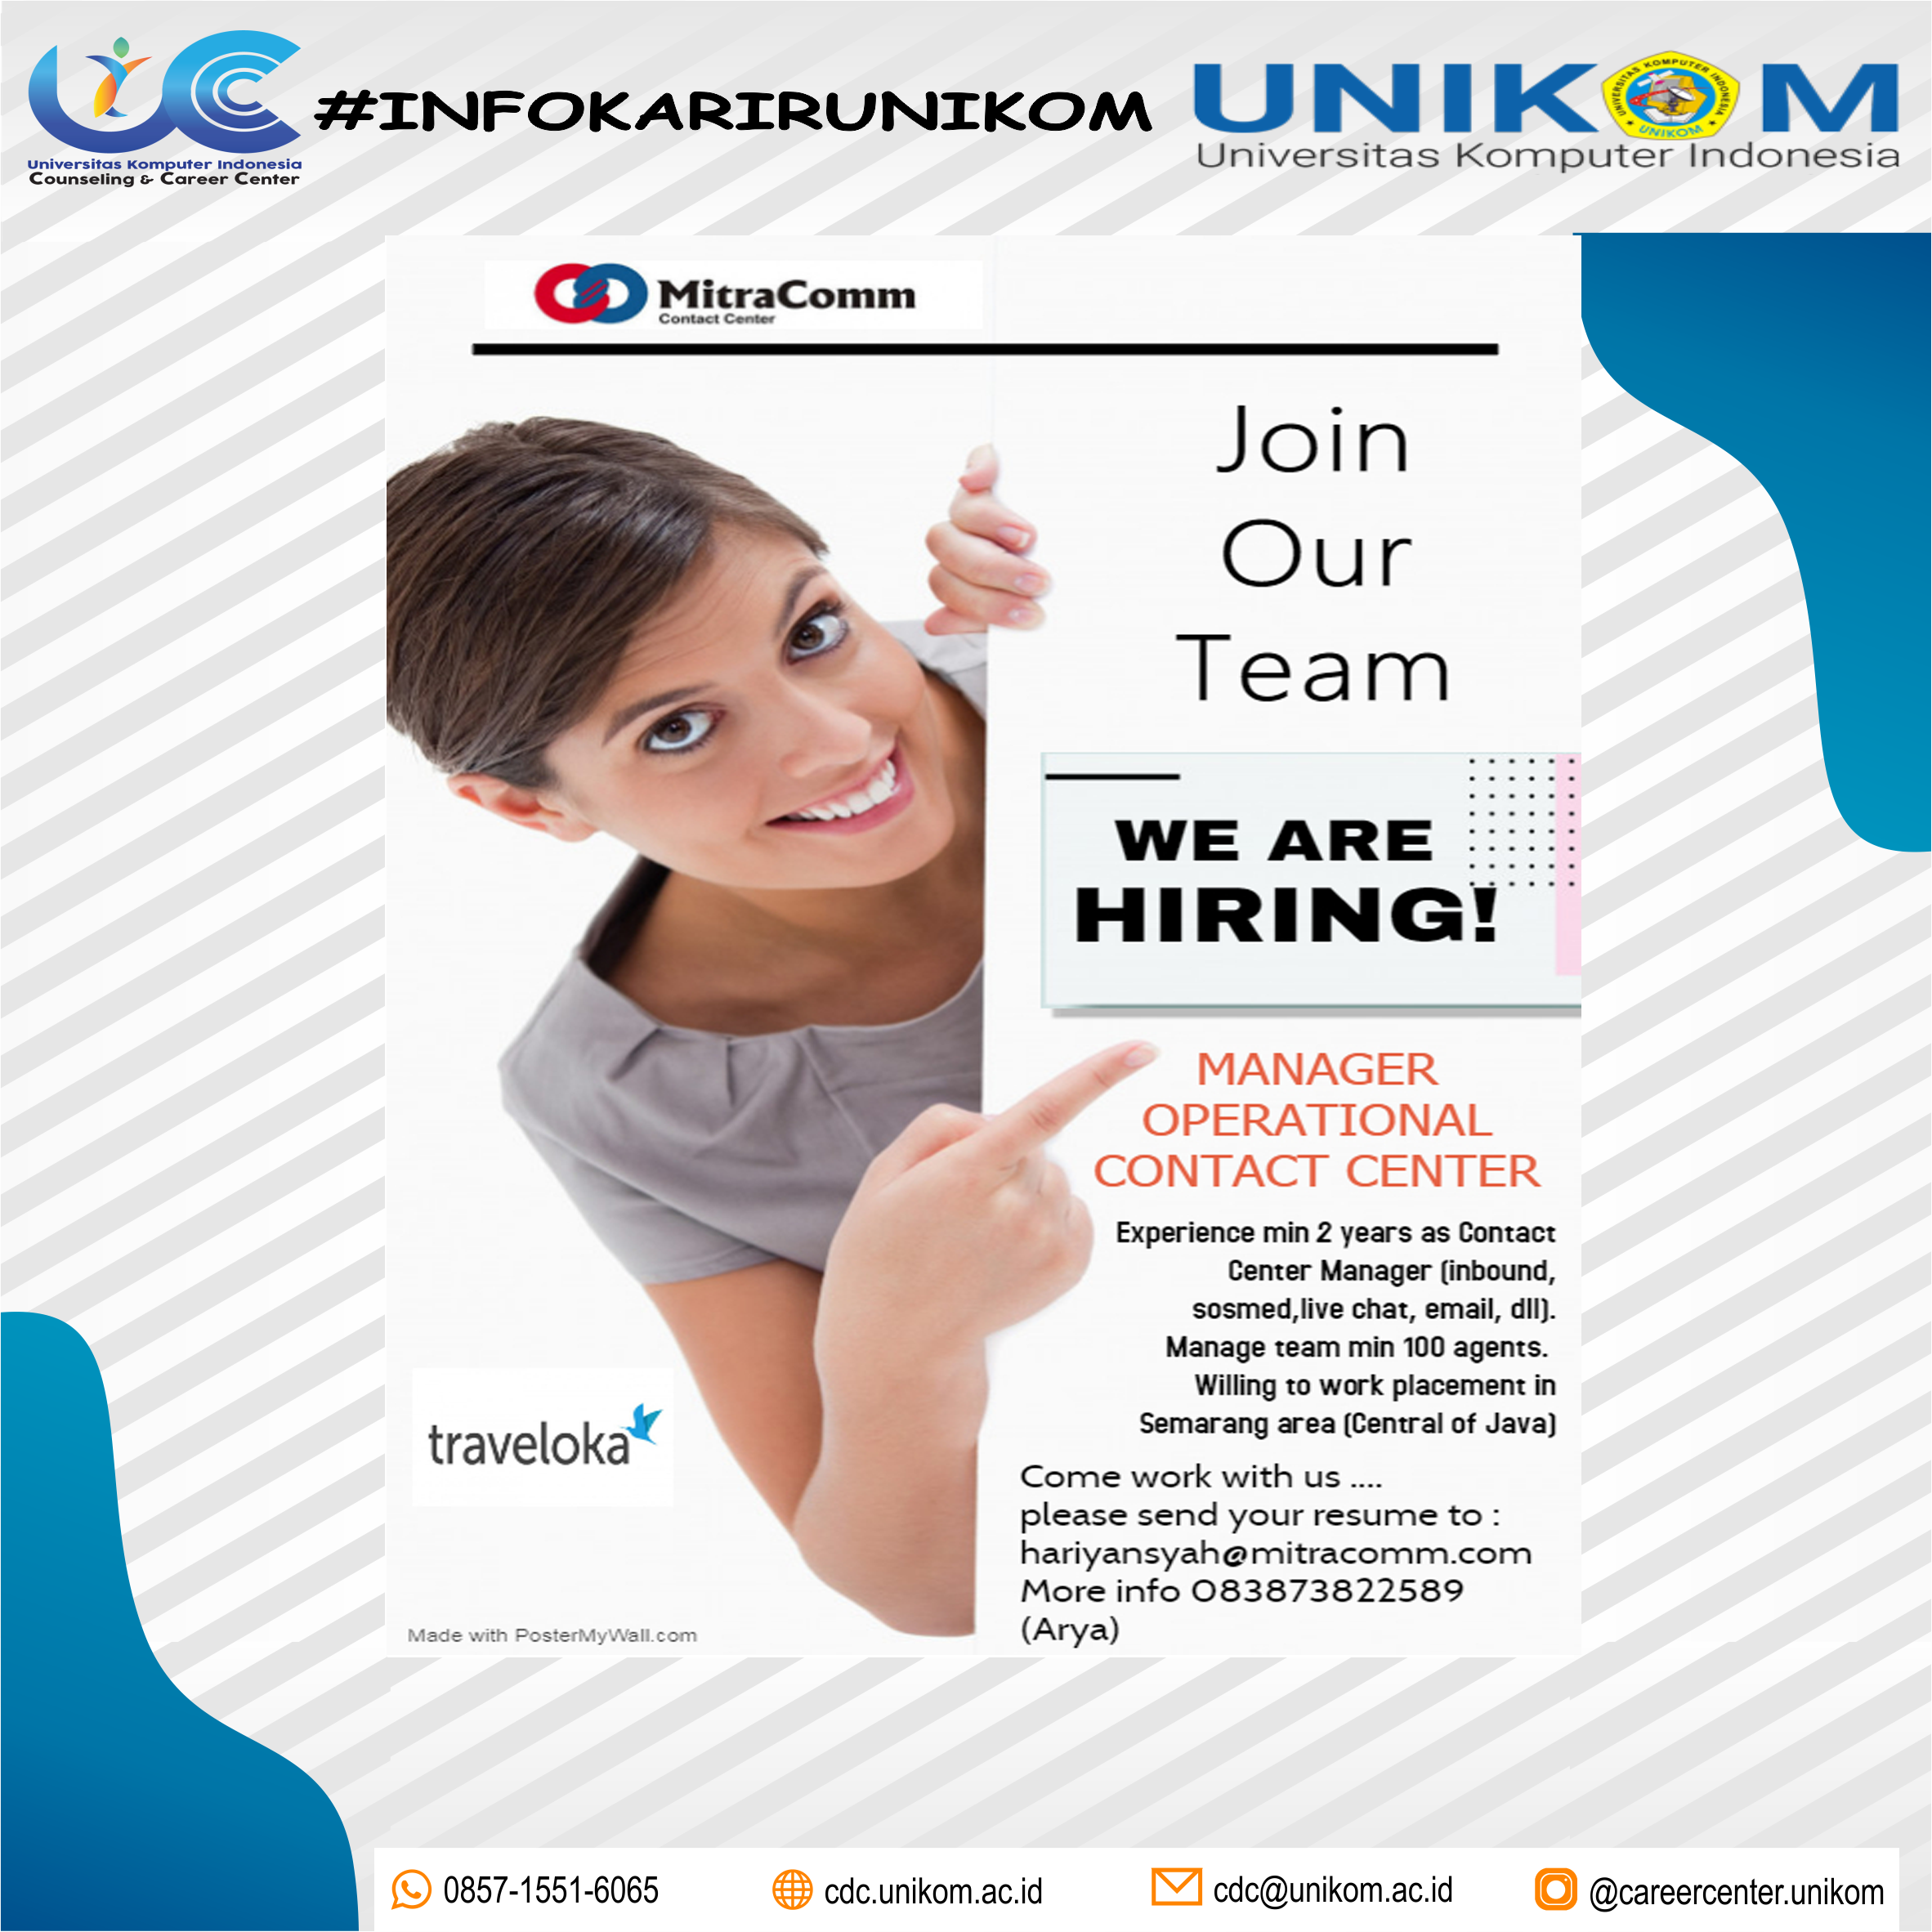 4.-hiring-now-manager-contact-center-semarag.png